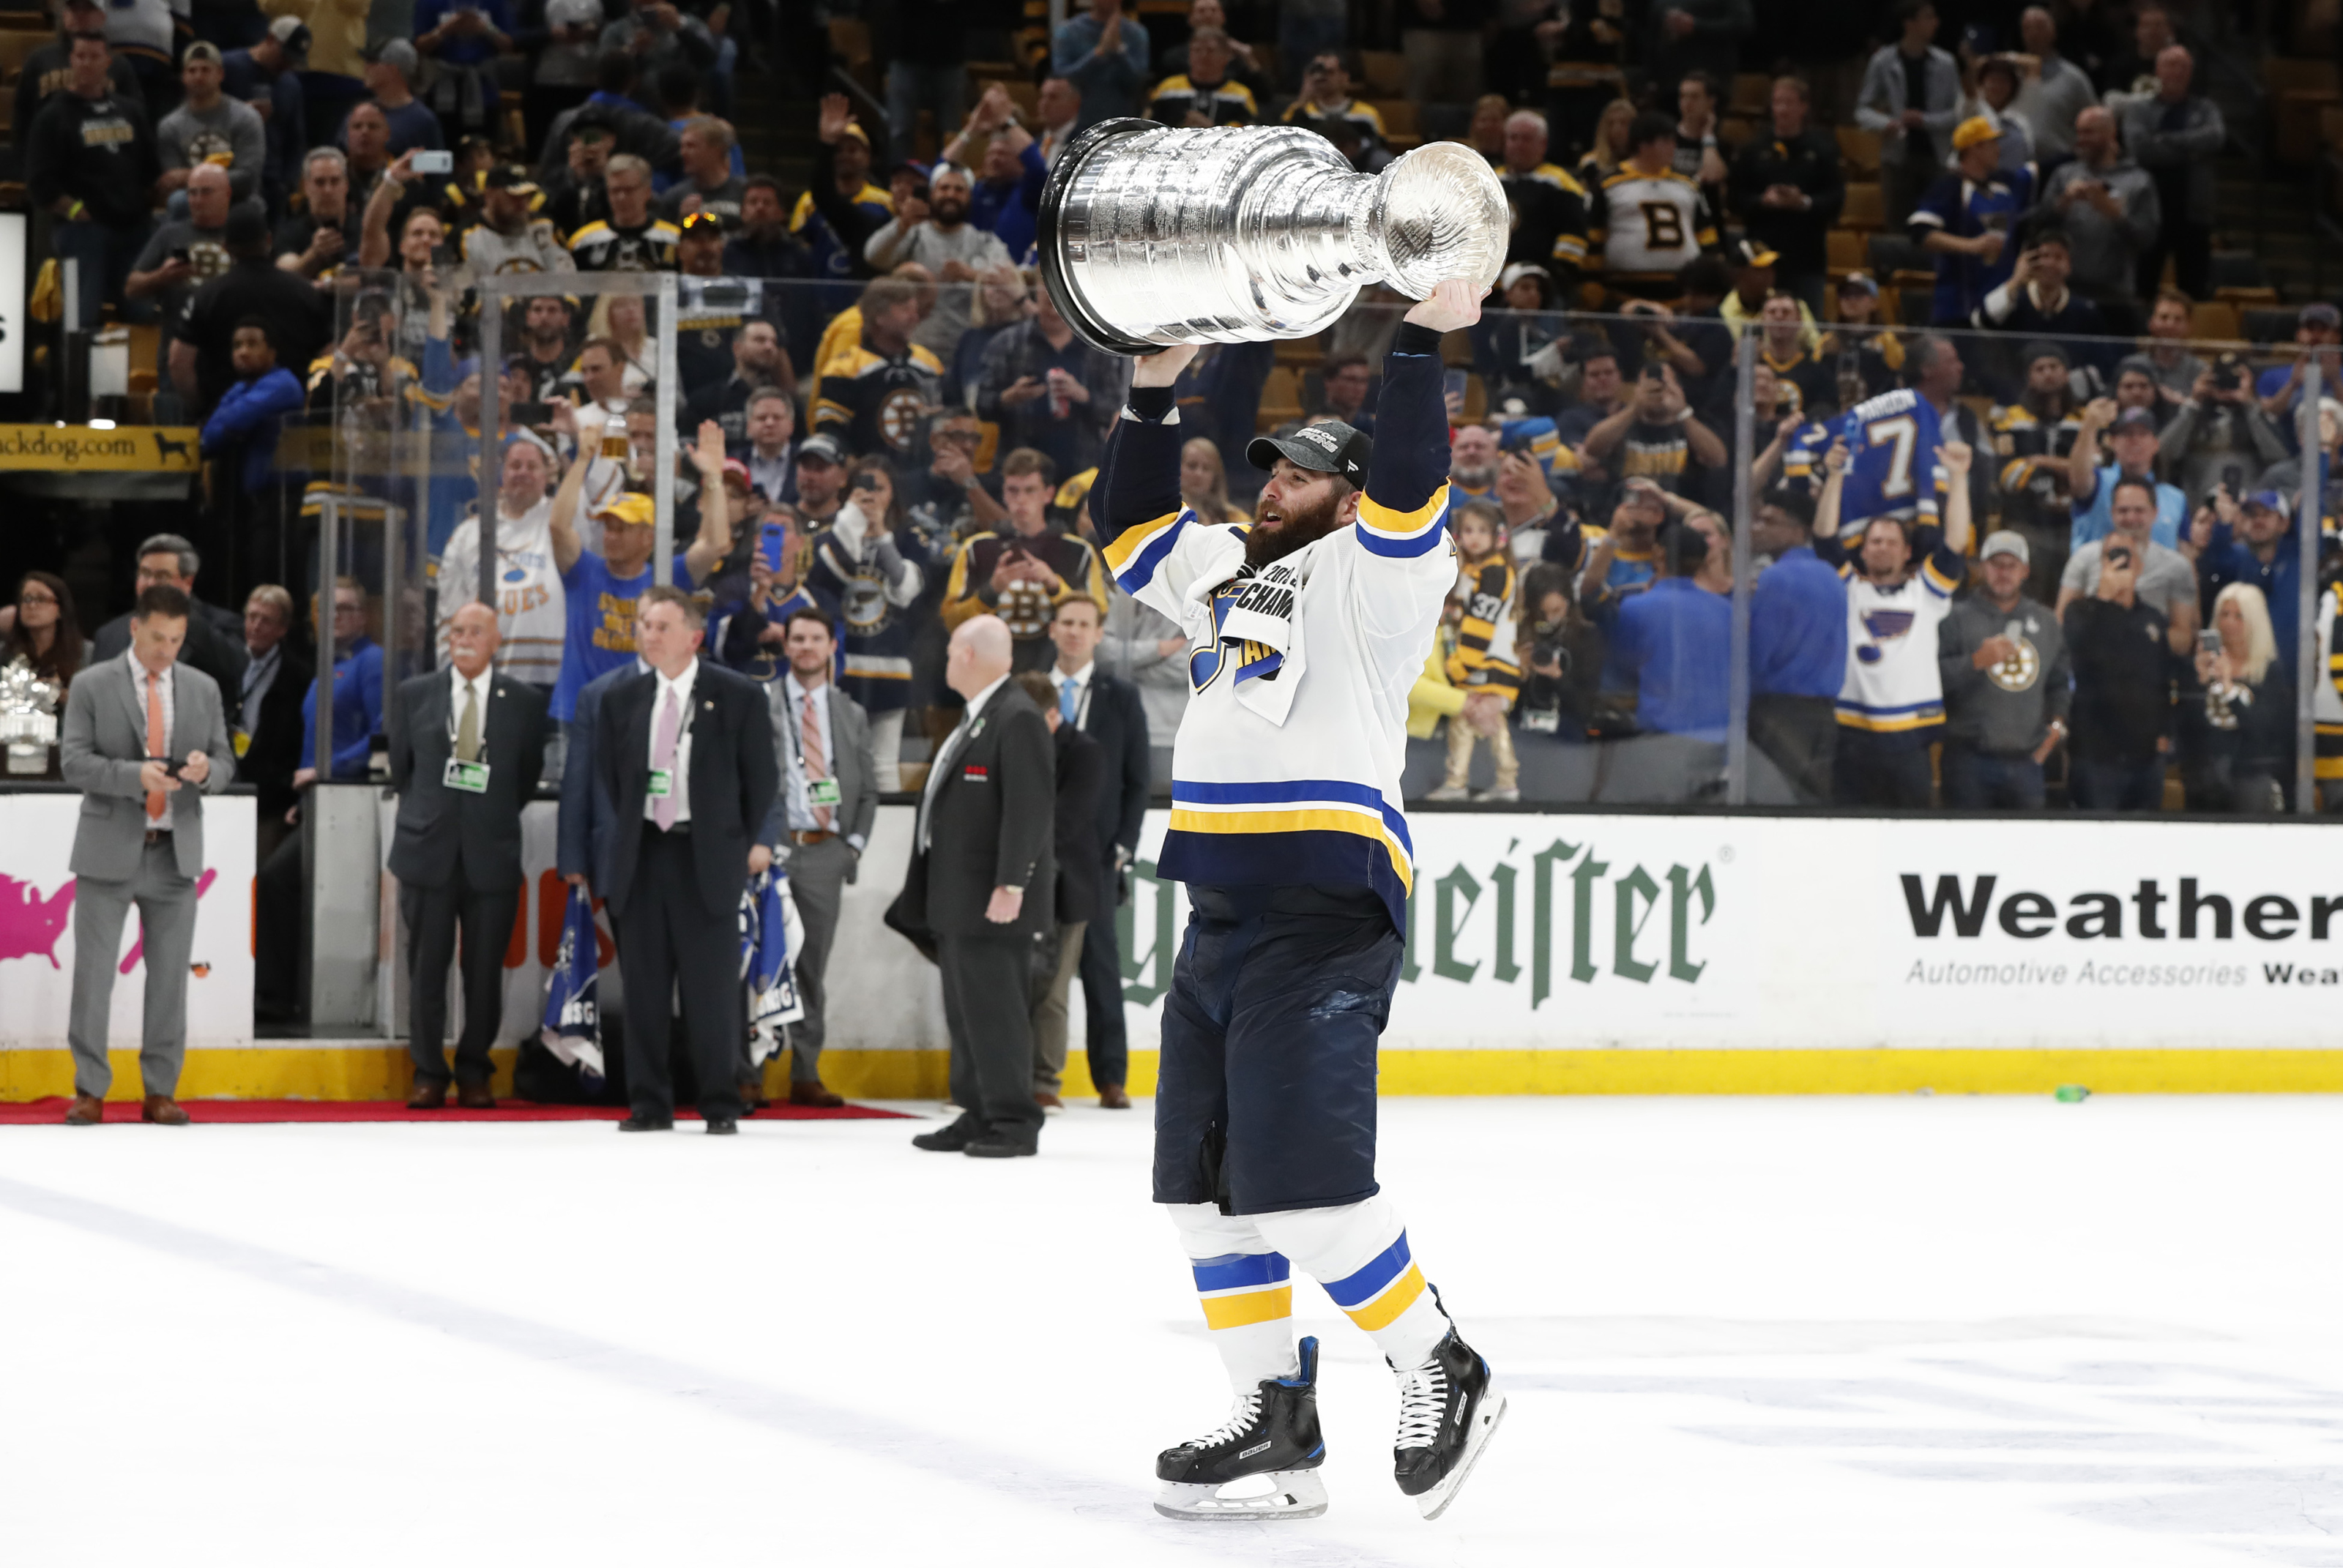 St. Louis Blues Future Is Better Without Pat Maroon